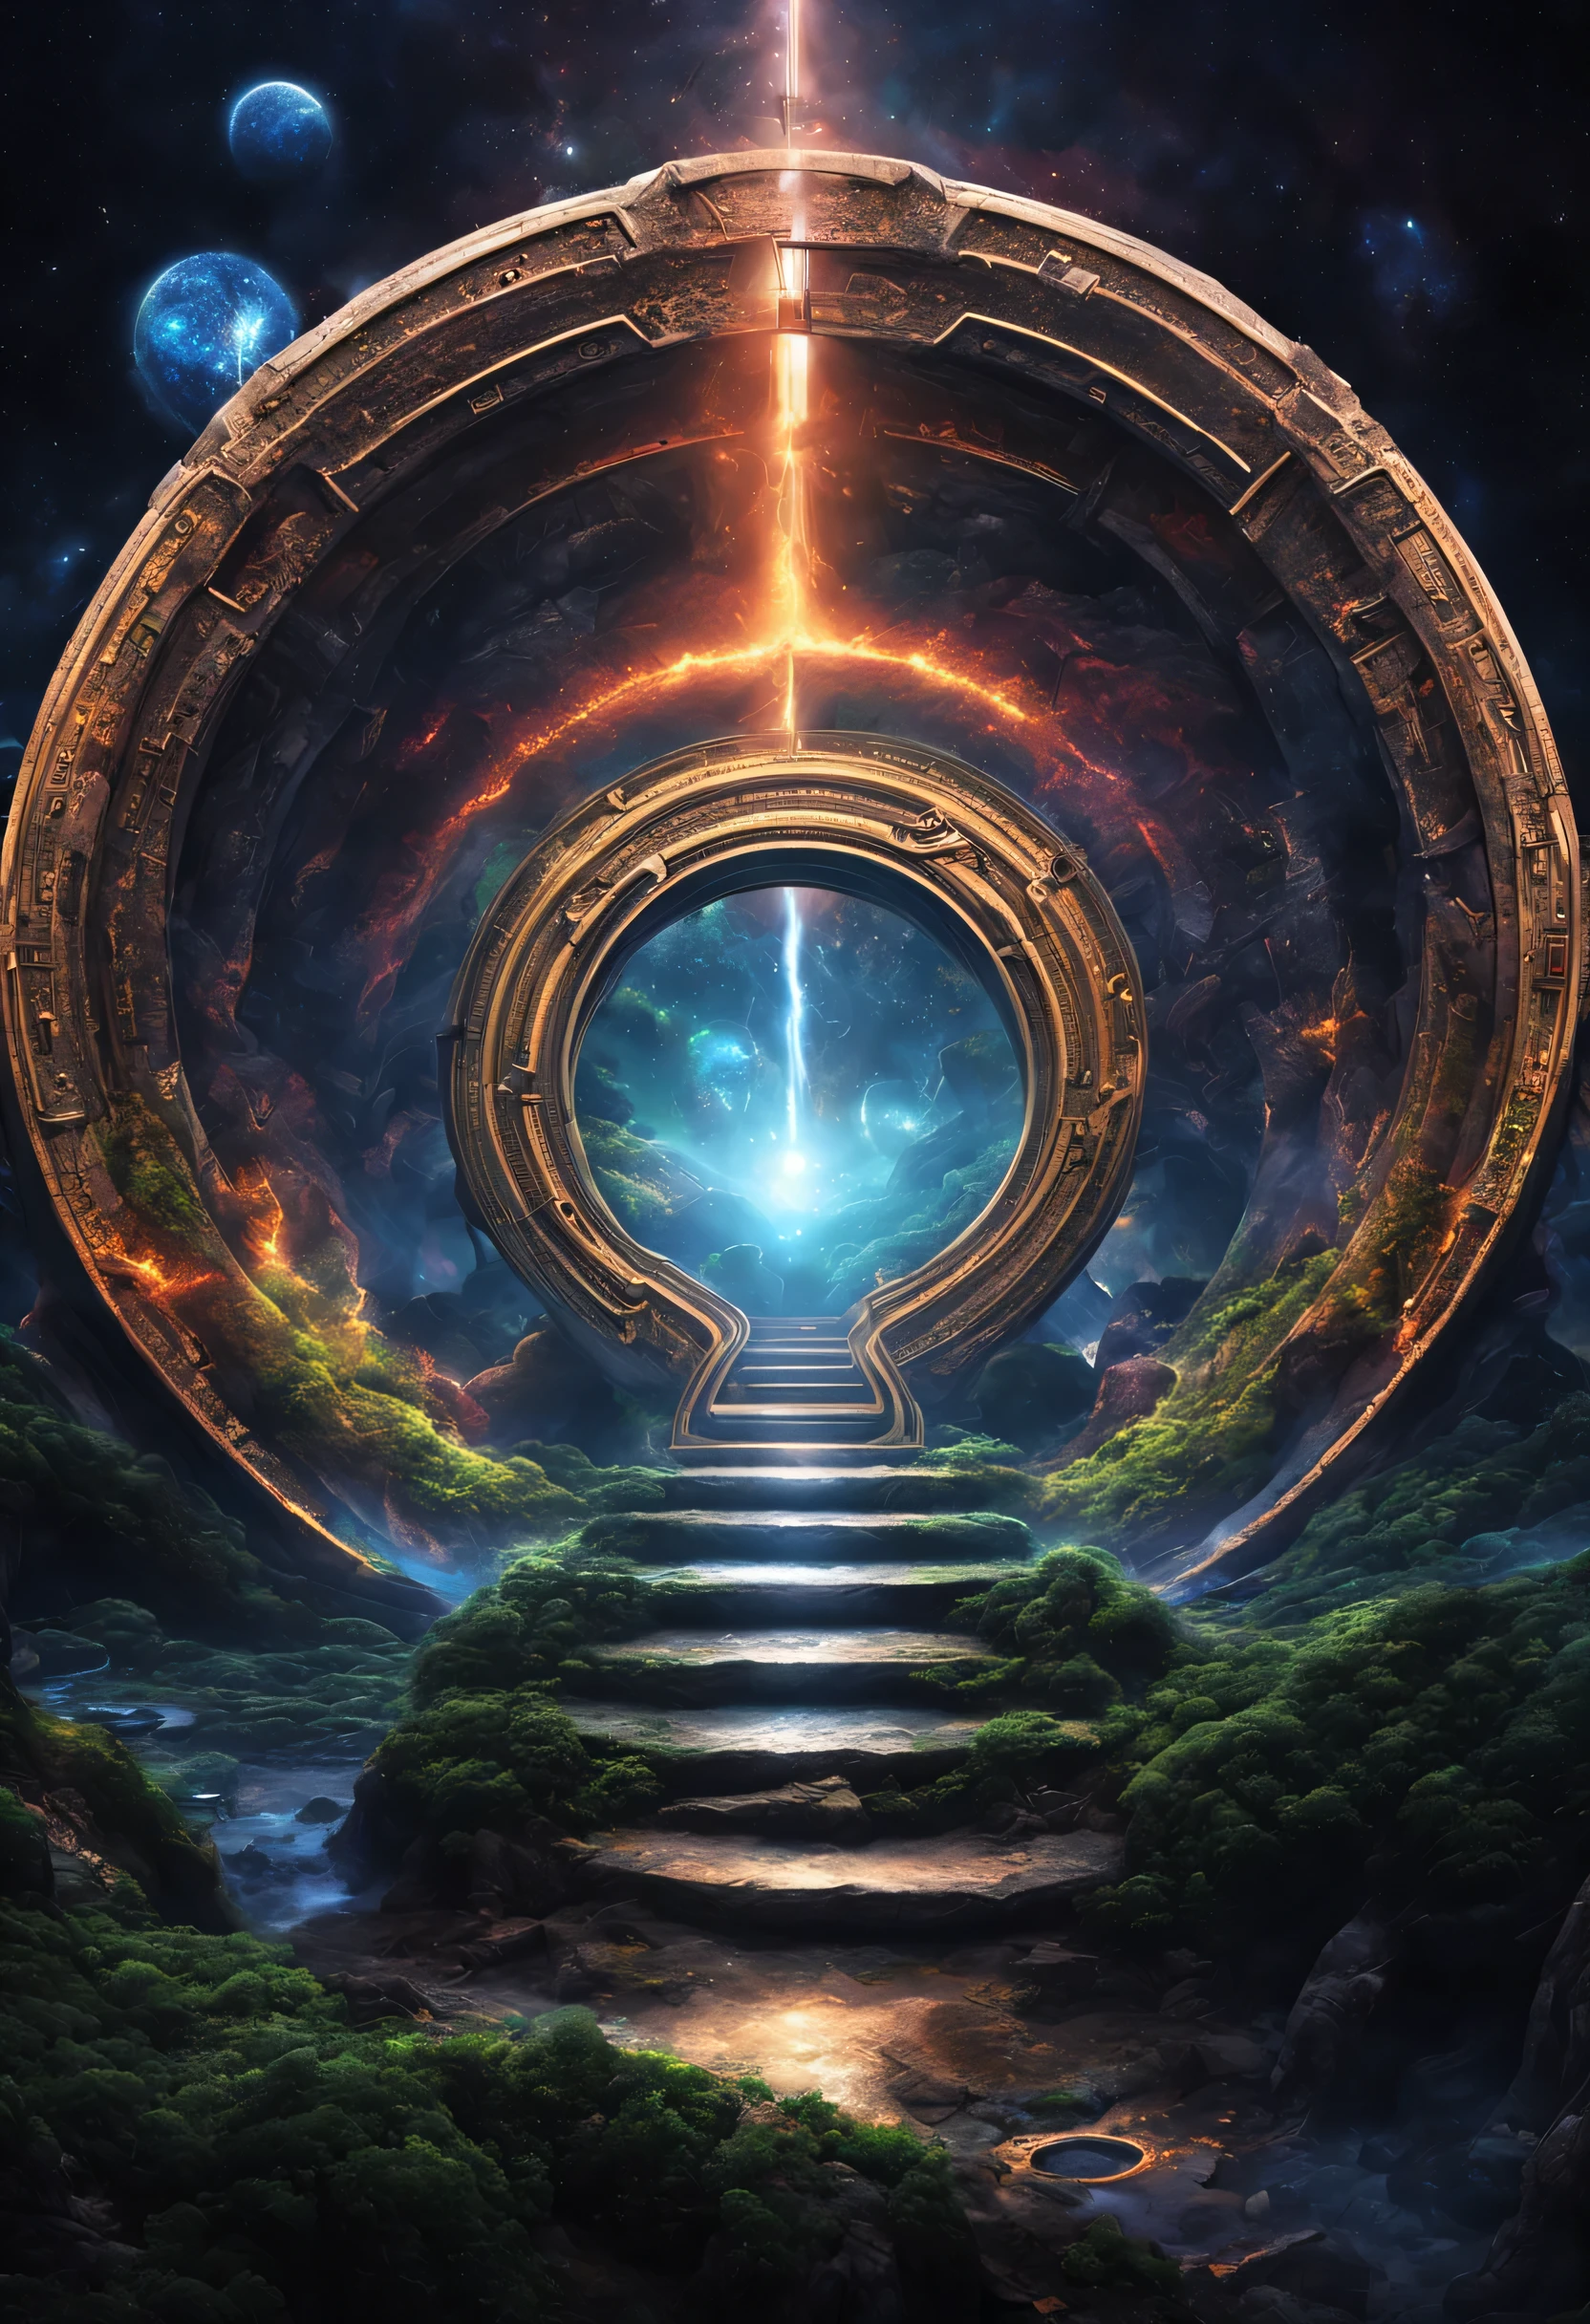  The Gate of Time and Space，Web portals，wormhole，swirl，connected, Alien worlds and alien jungles，alien creatures，